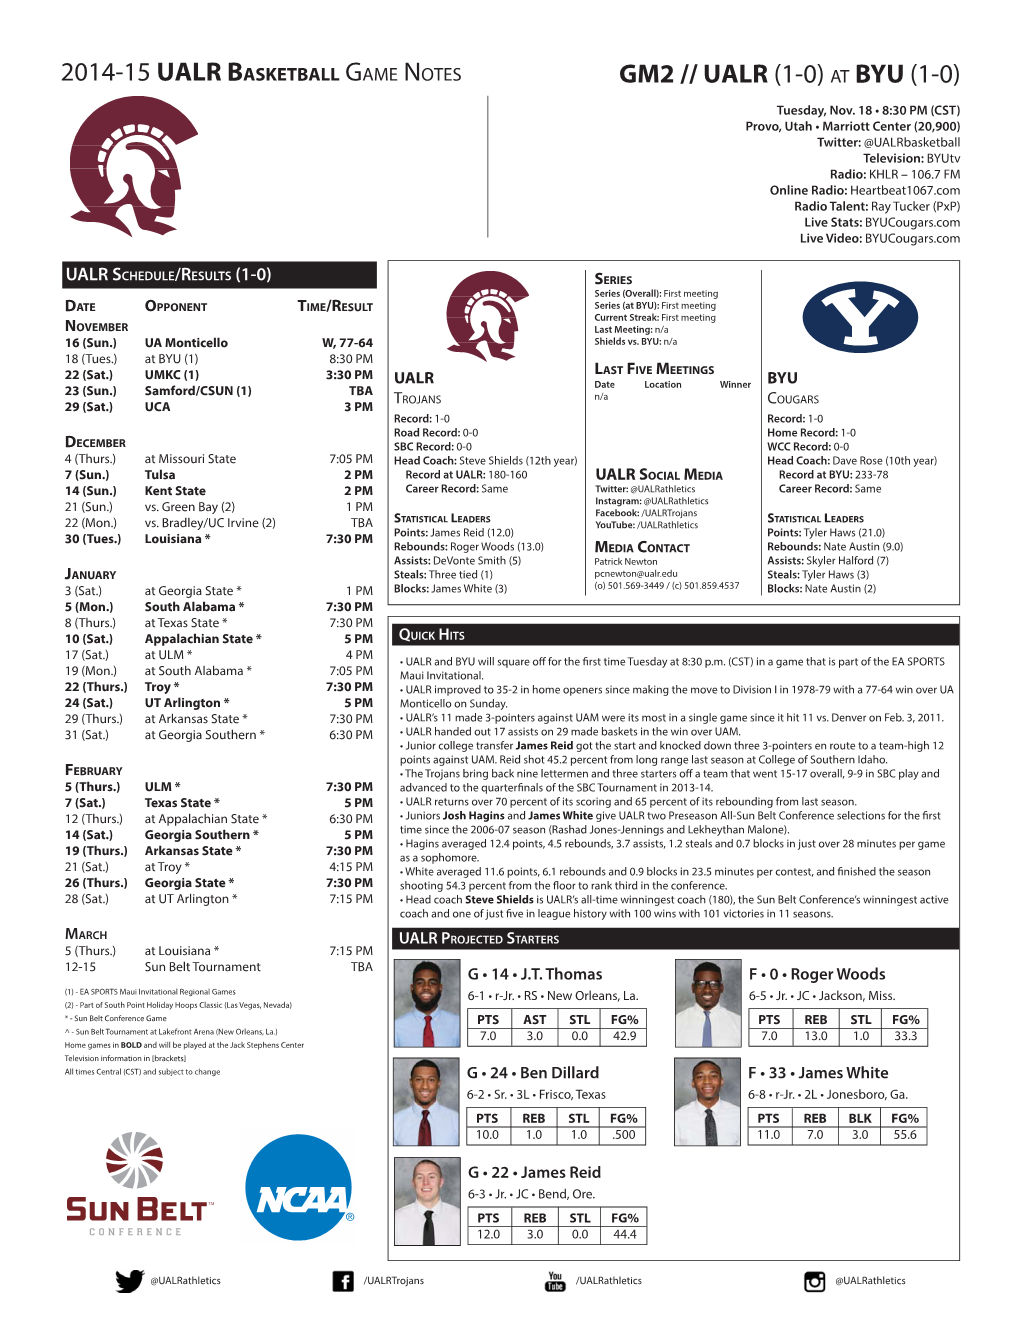 2014-15 Game Notes Template BYU.Indd